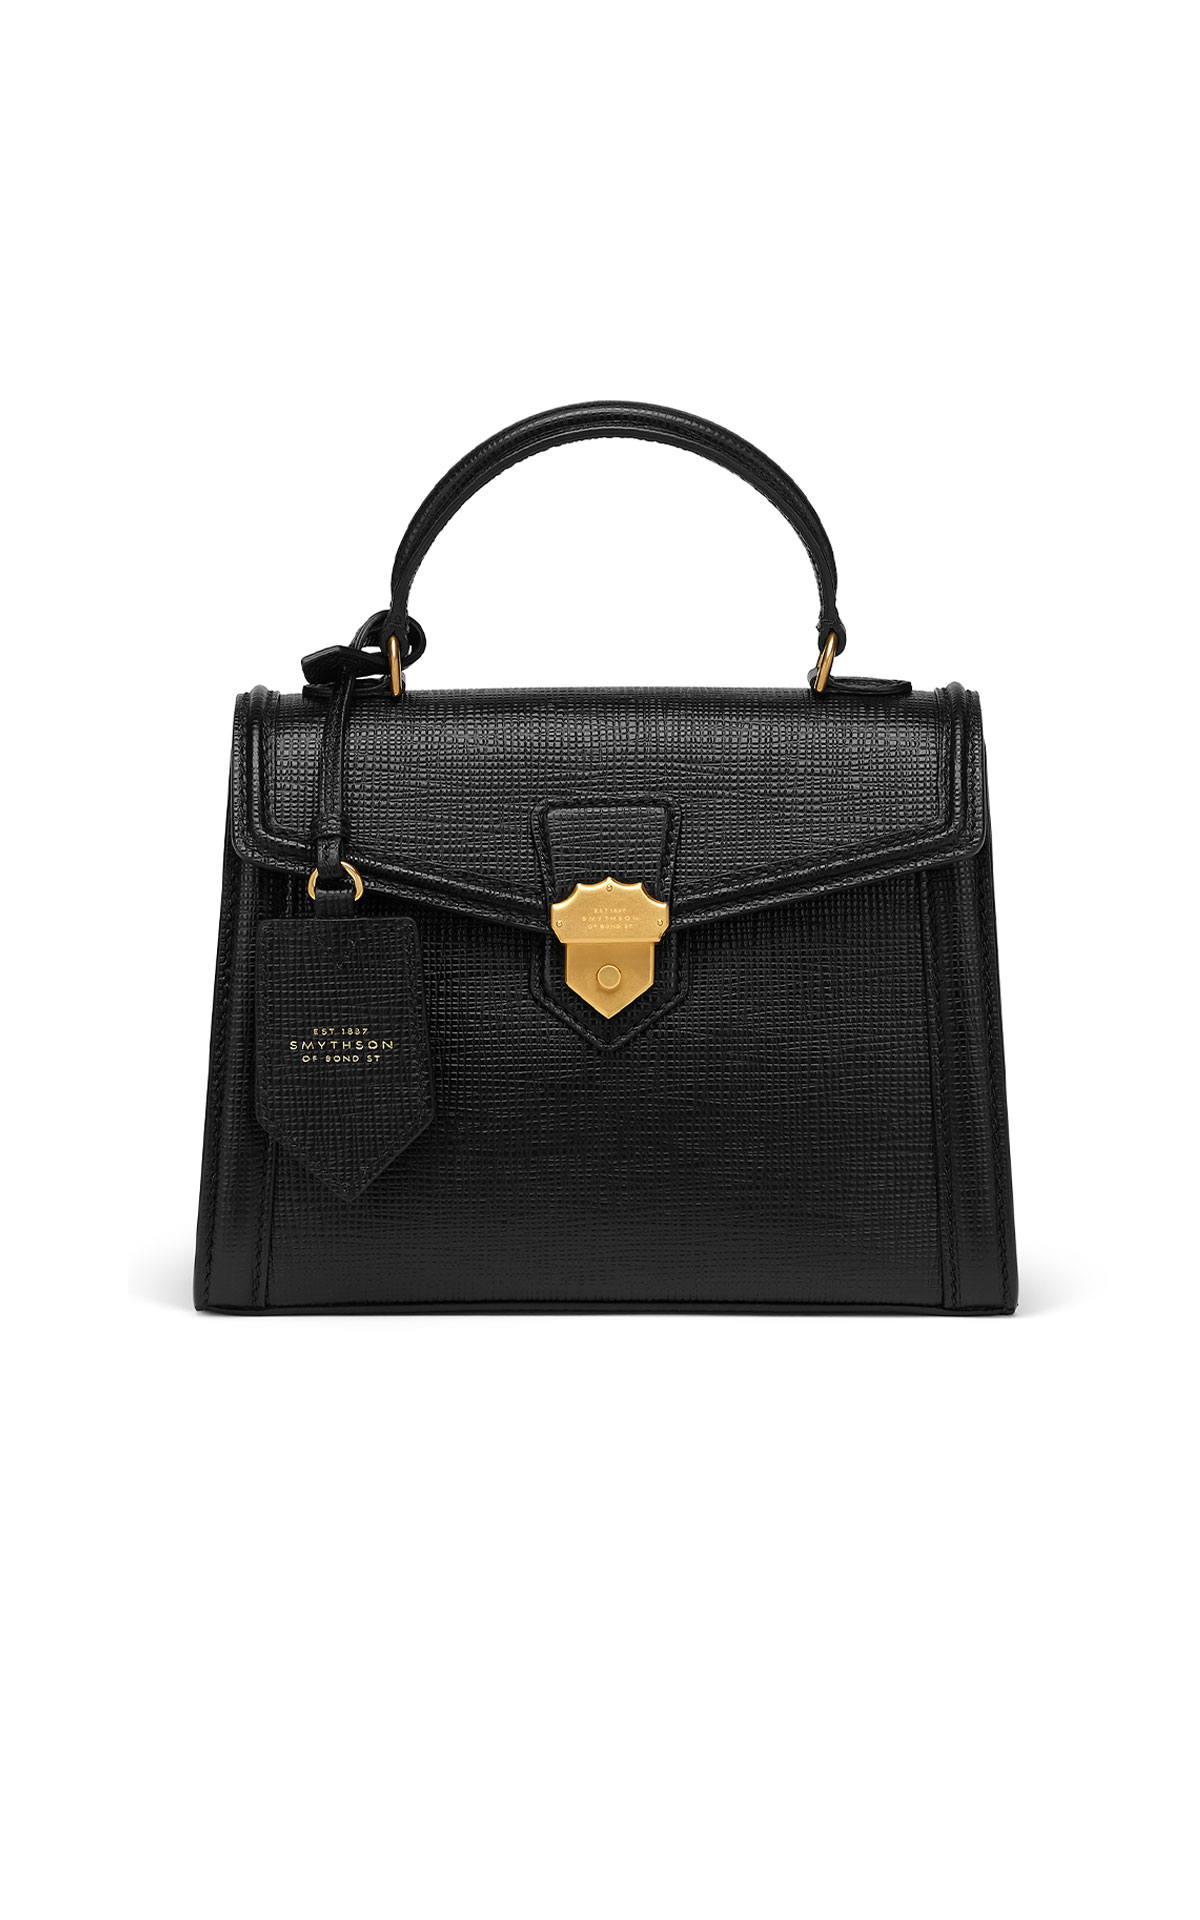 Smythson Panama small coronet top handle black from Bicester Village